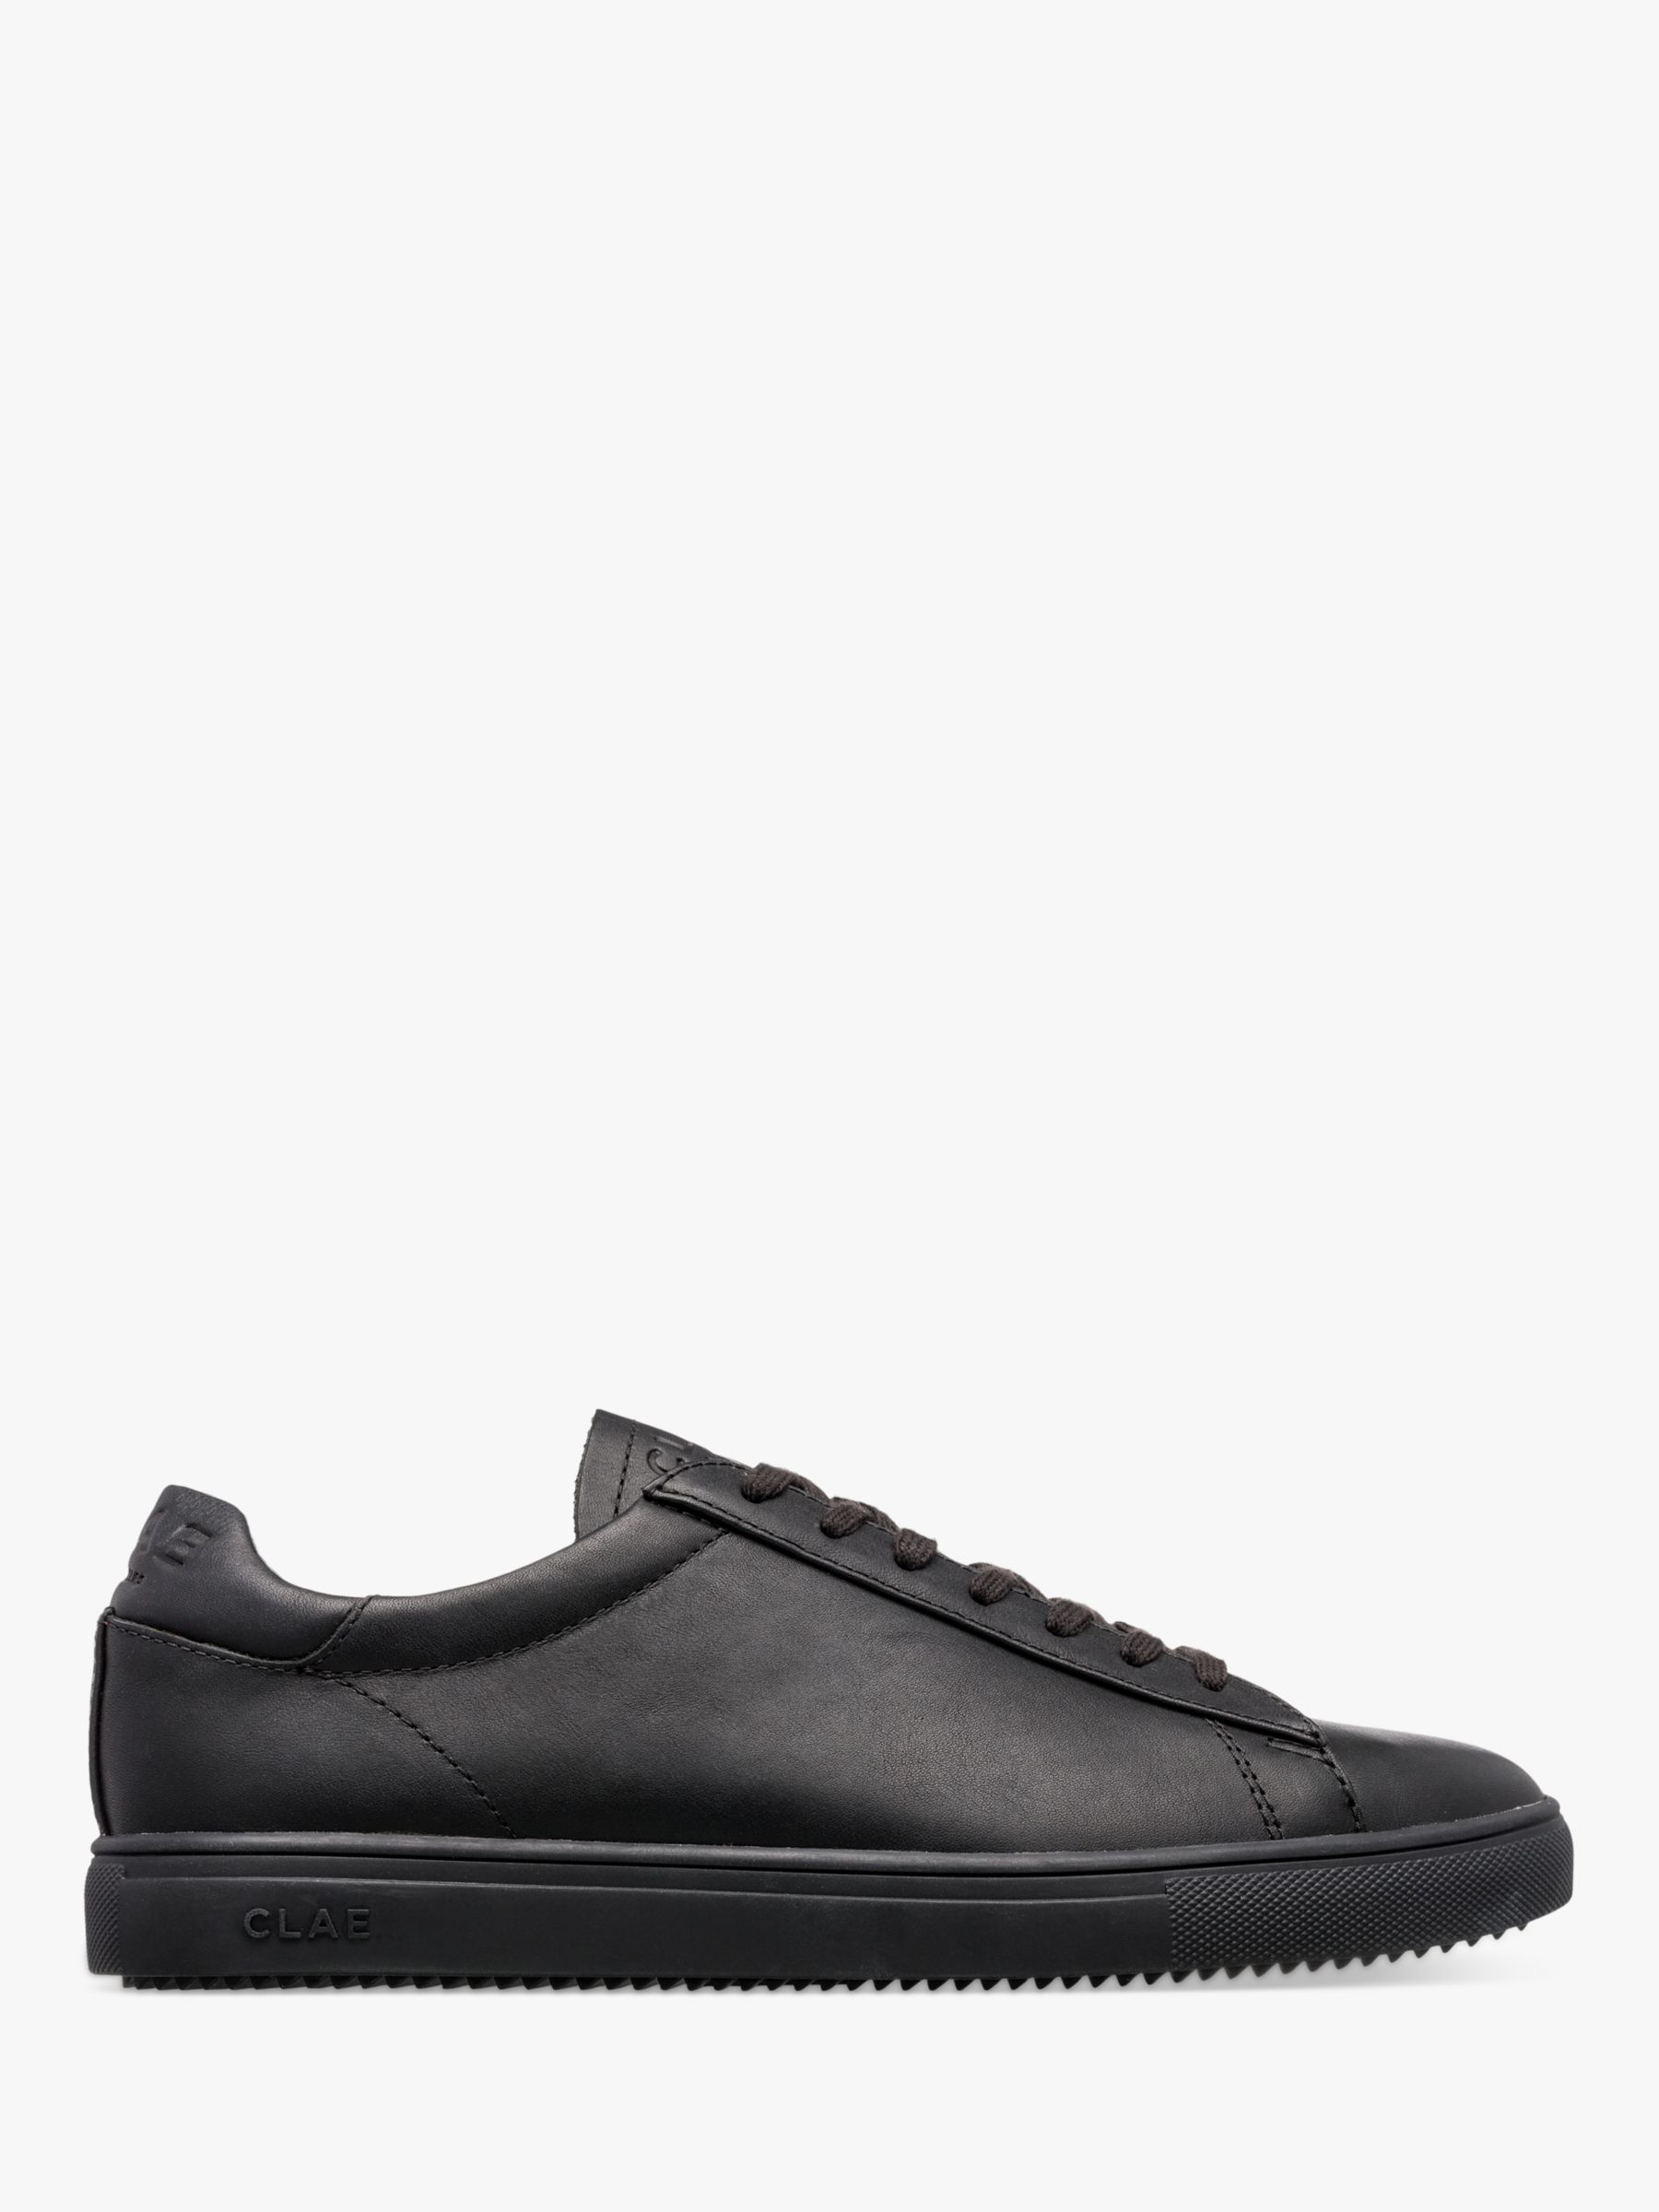 CLAE Bradley Essentials Water Repellent Leather Trainers, Black at John ...